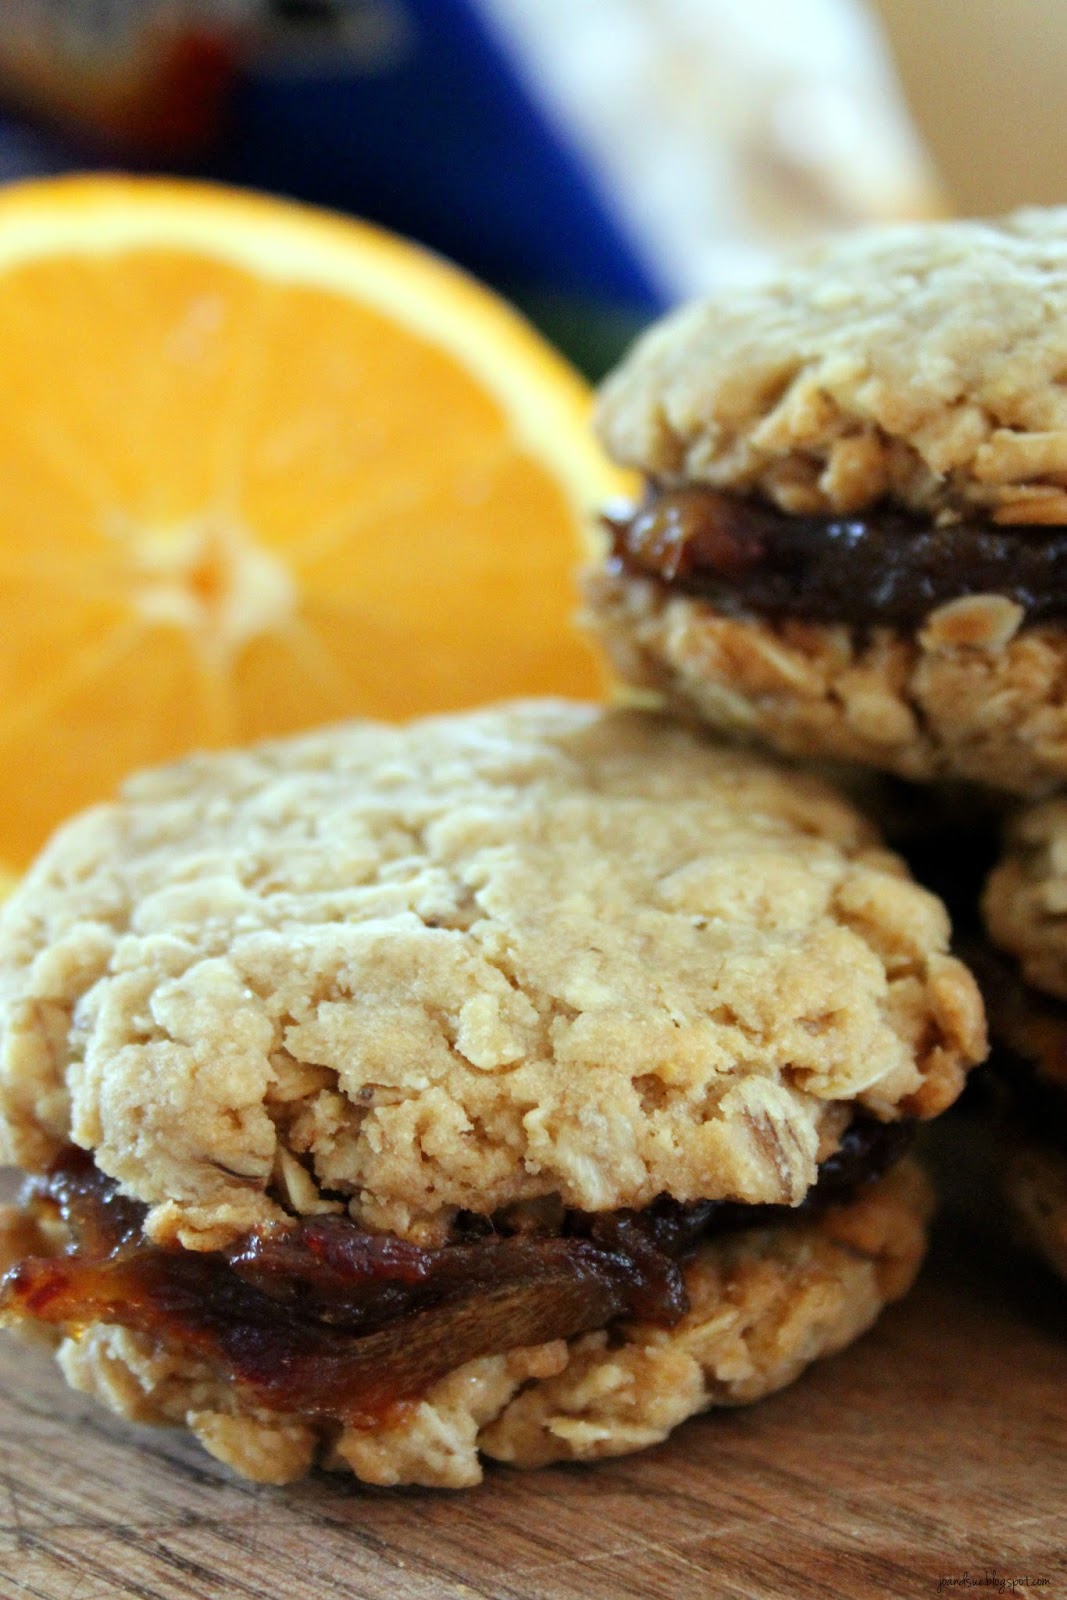 Jo and Sue: Old Fashioned Date Filled Oatmeal Cookies